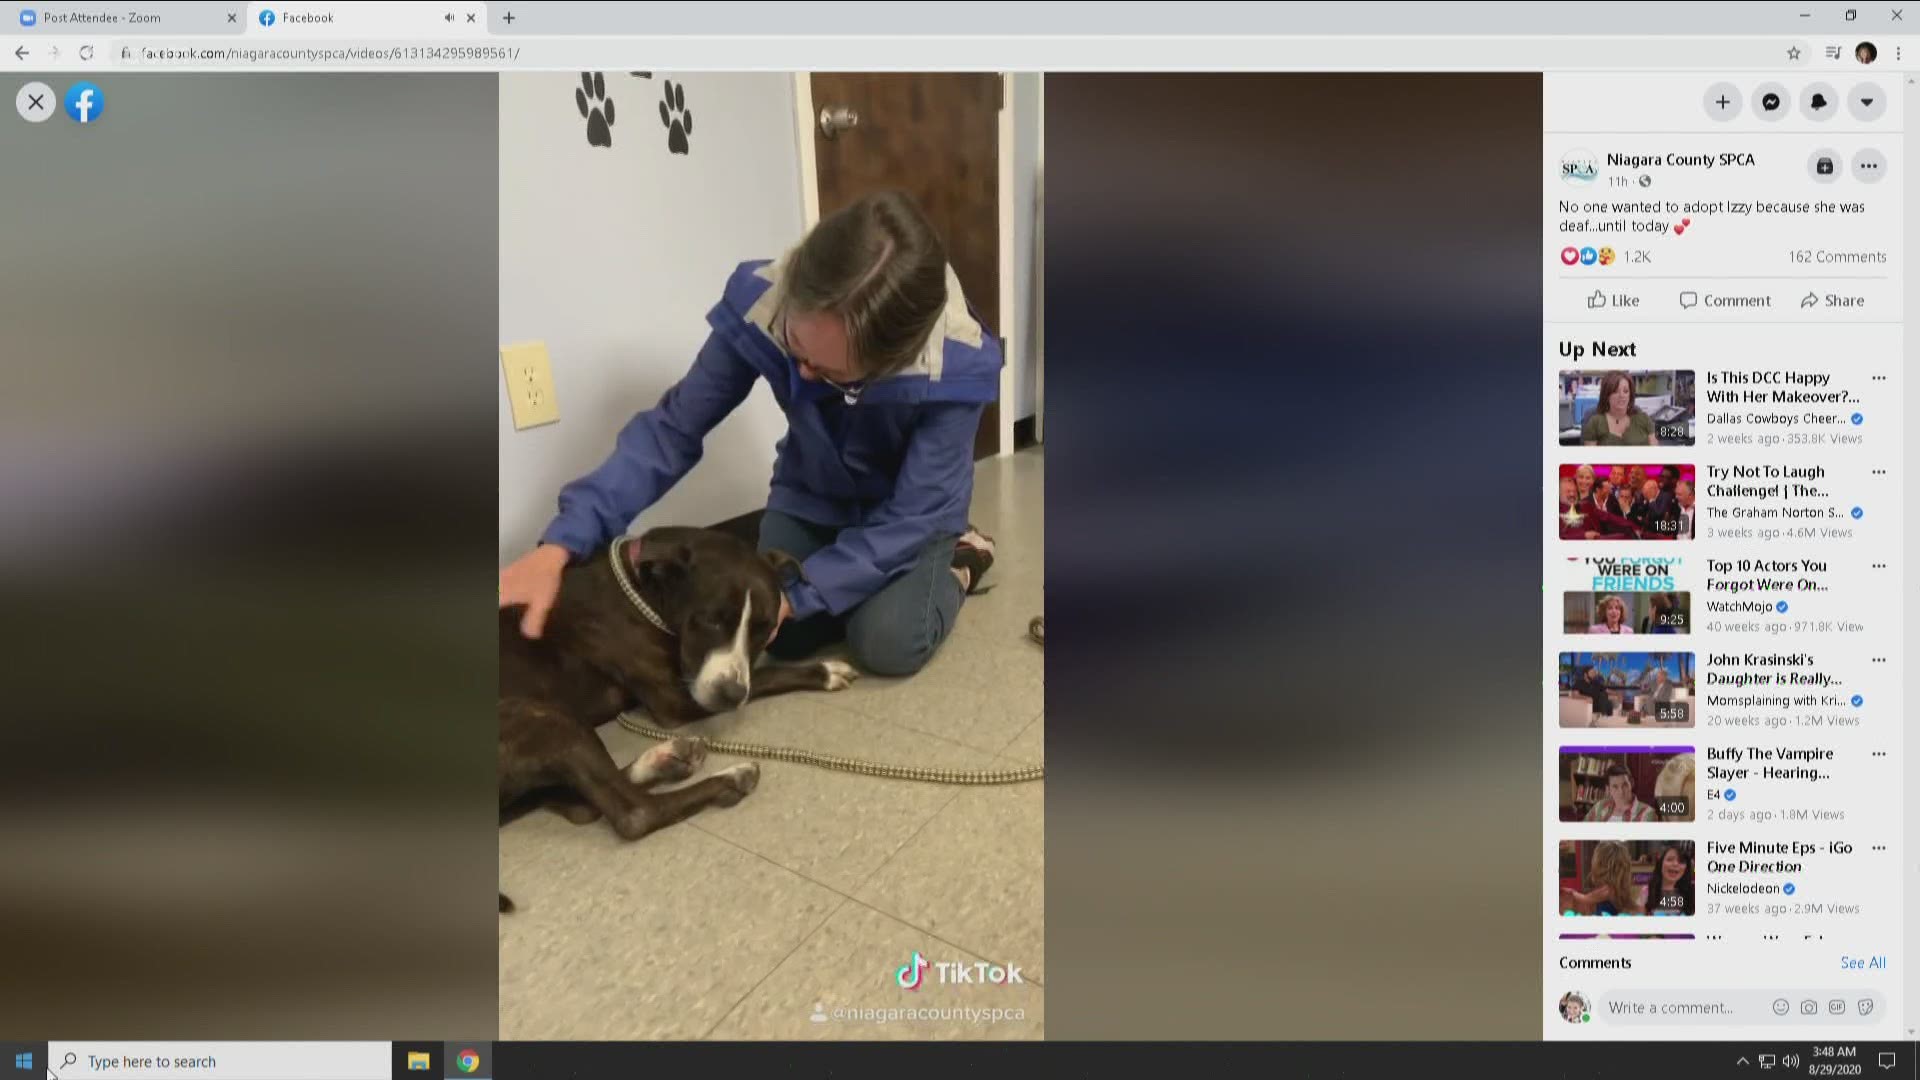 The Niagara County SPCA shared a video on their Facebook showing Izzy with her new owner.